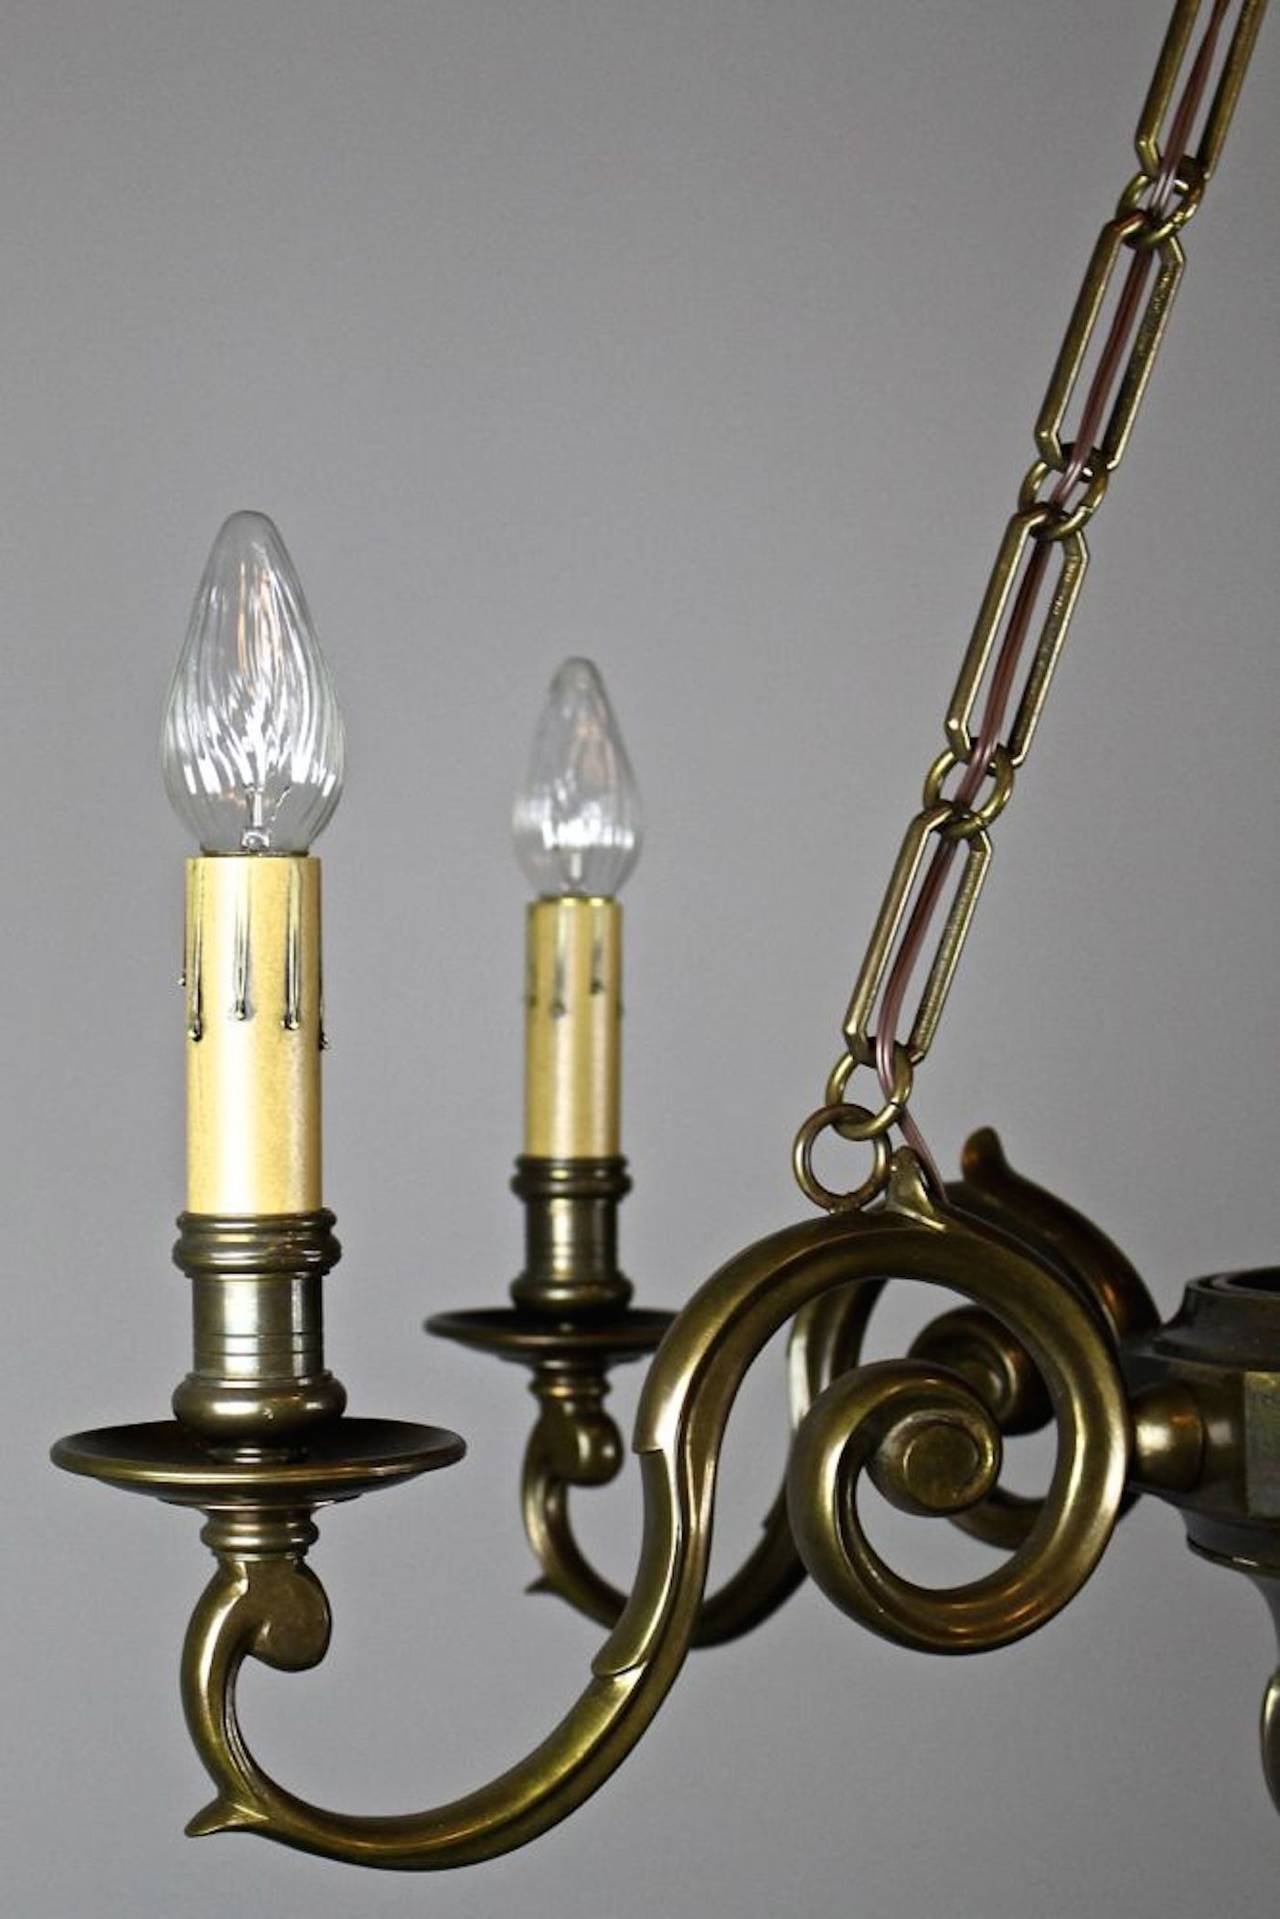 Large Sheffield Style Lighting Fixture with Candle Arms (6-light) For Sale 1